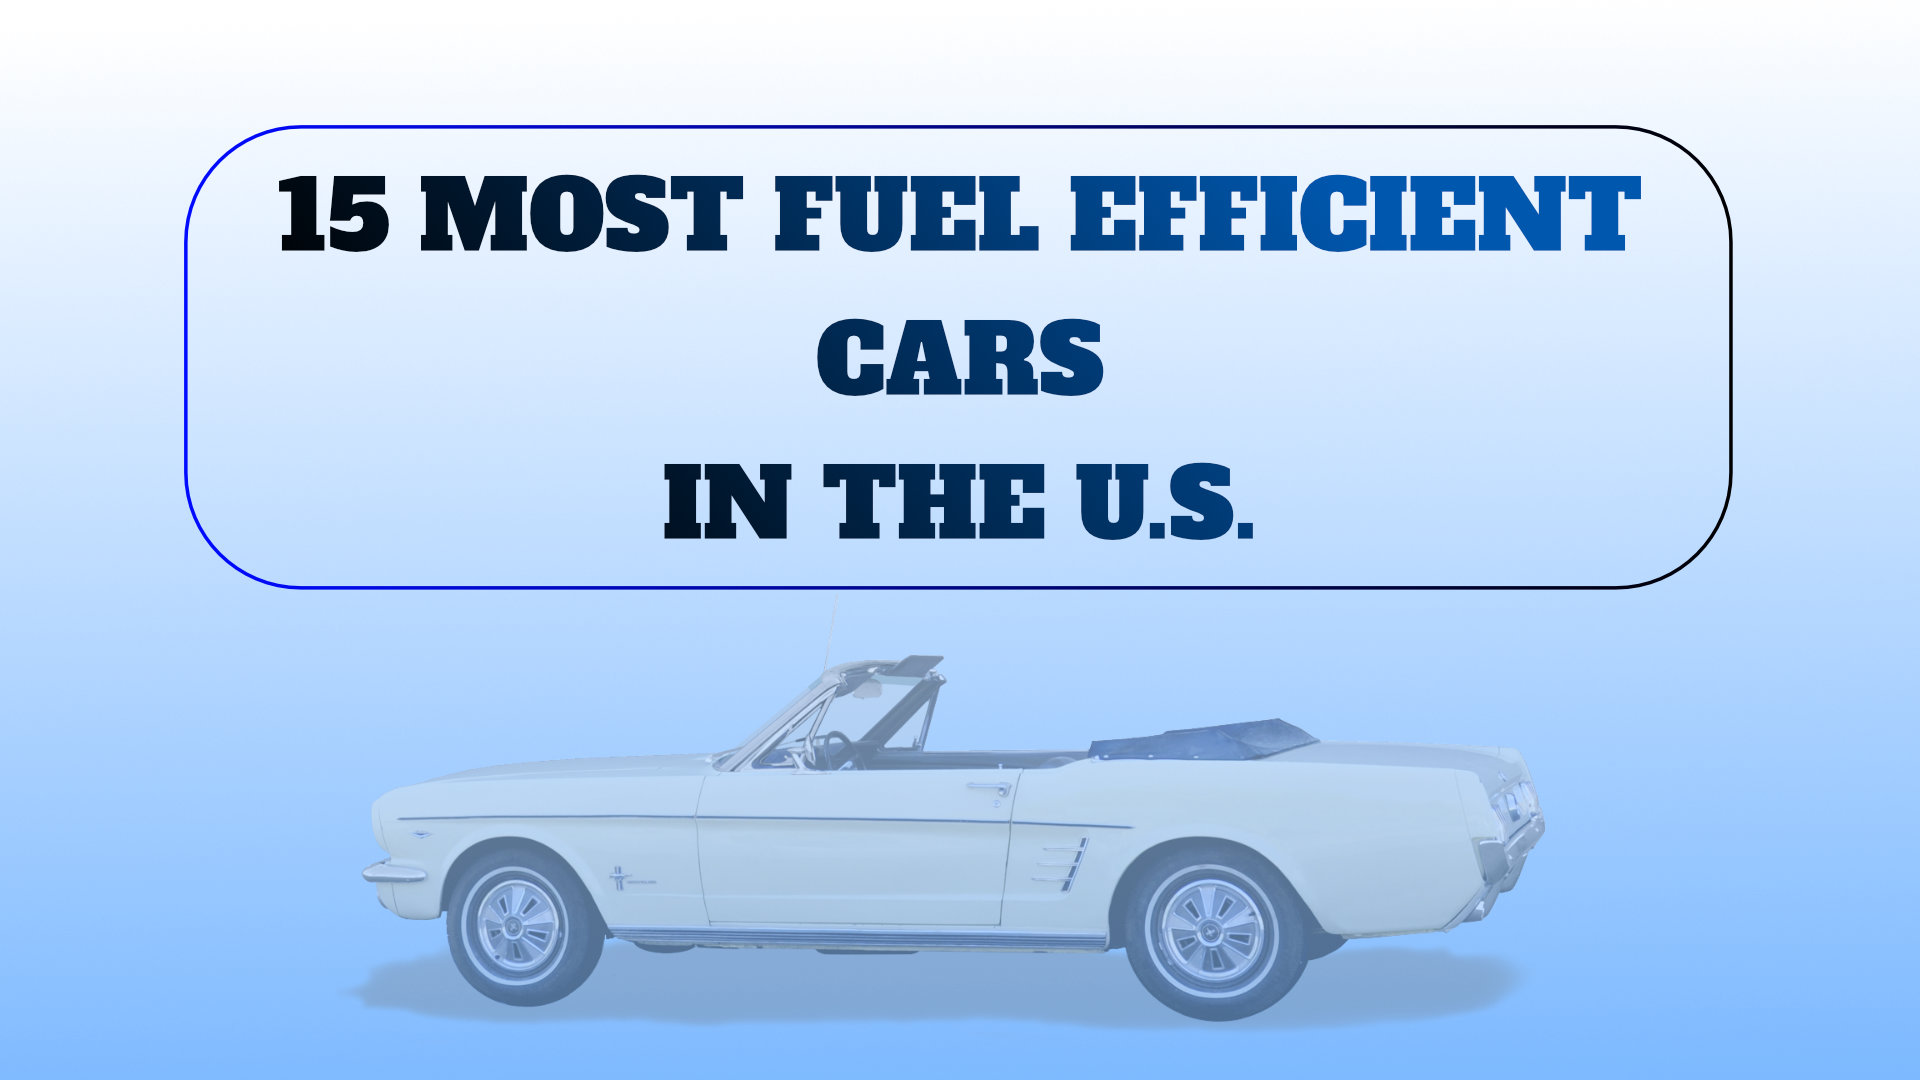 Top 15 Most Fuel Efficient Cars in the U.S.